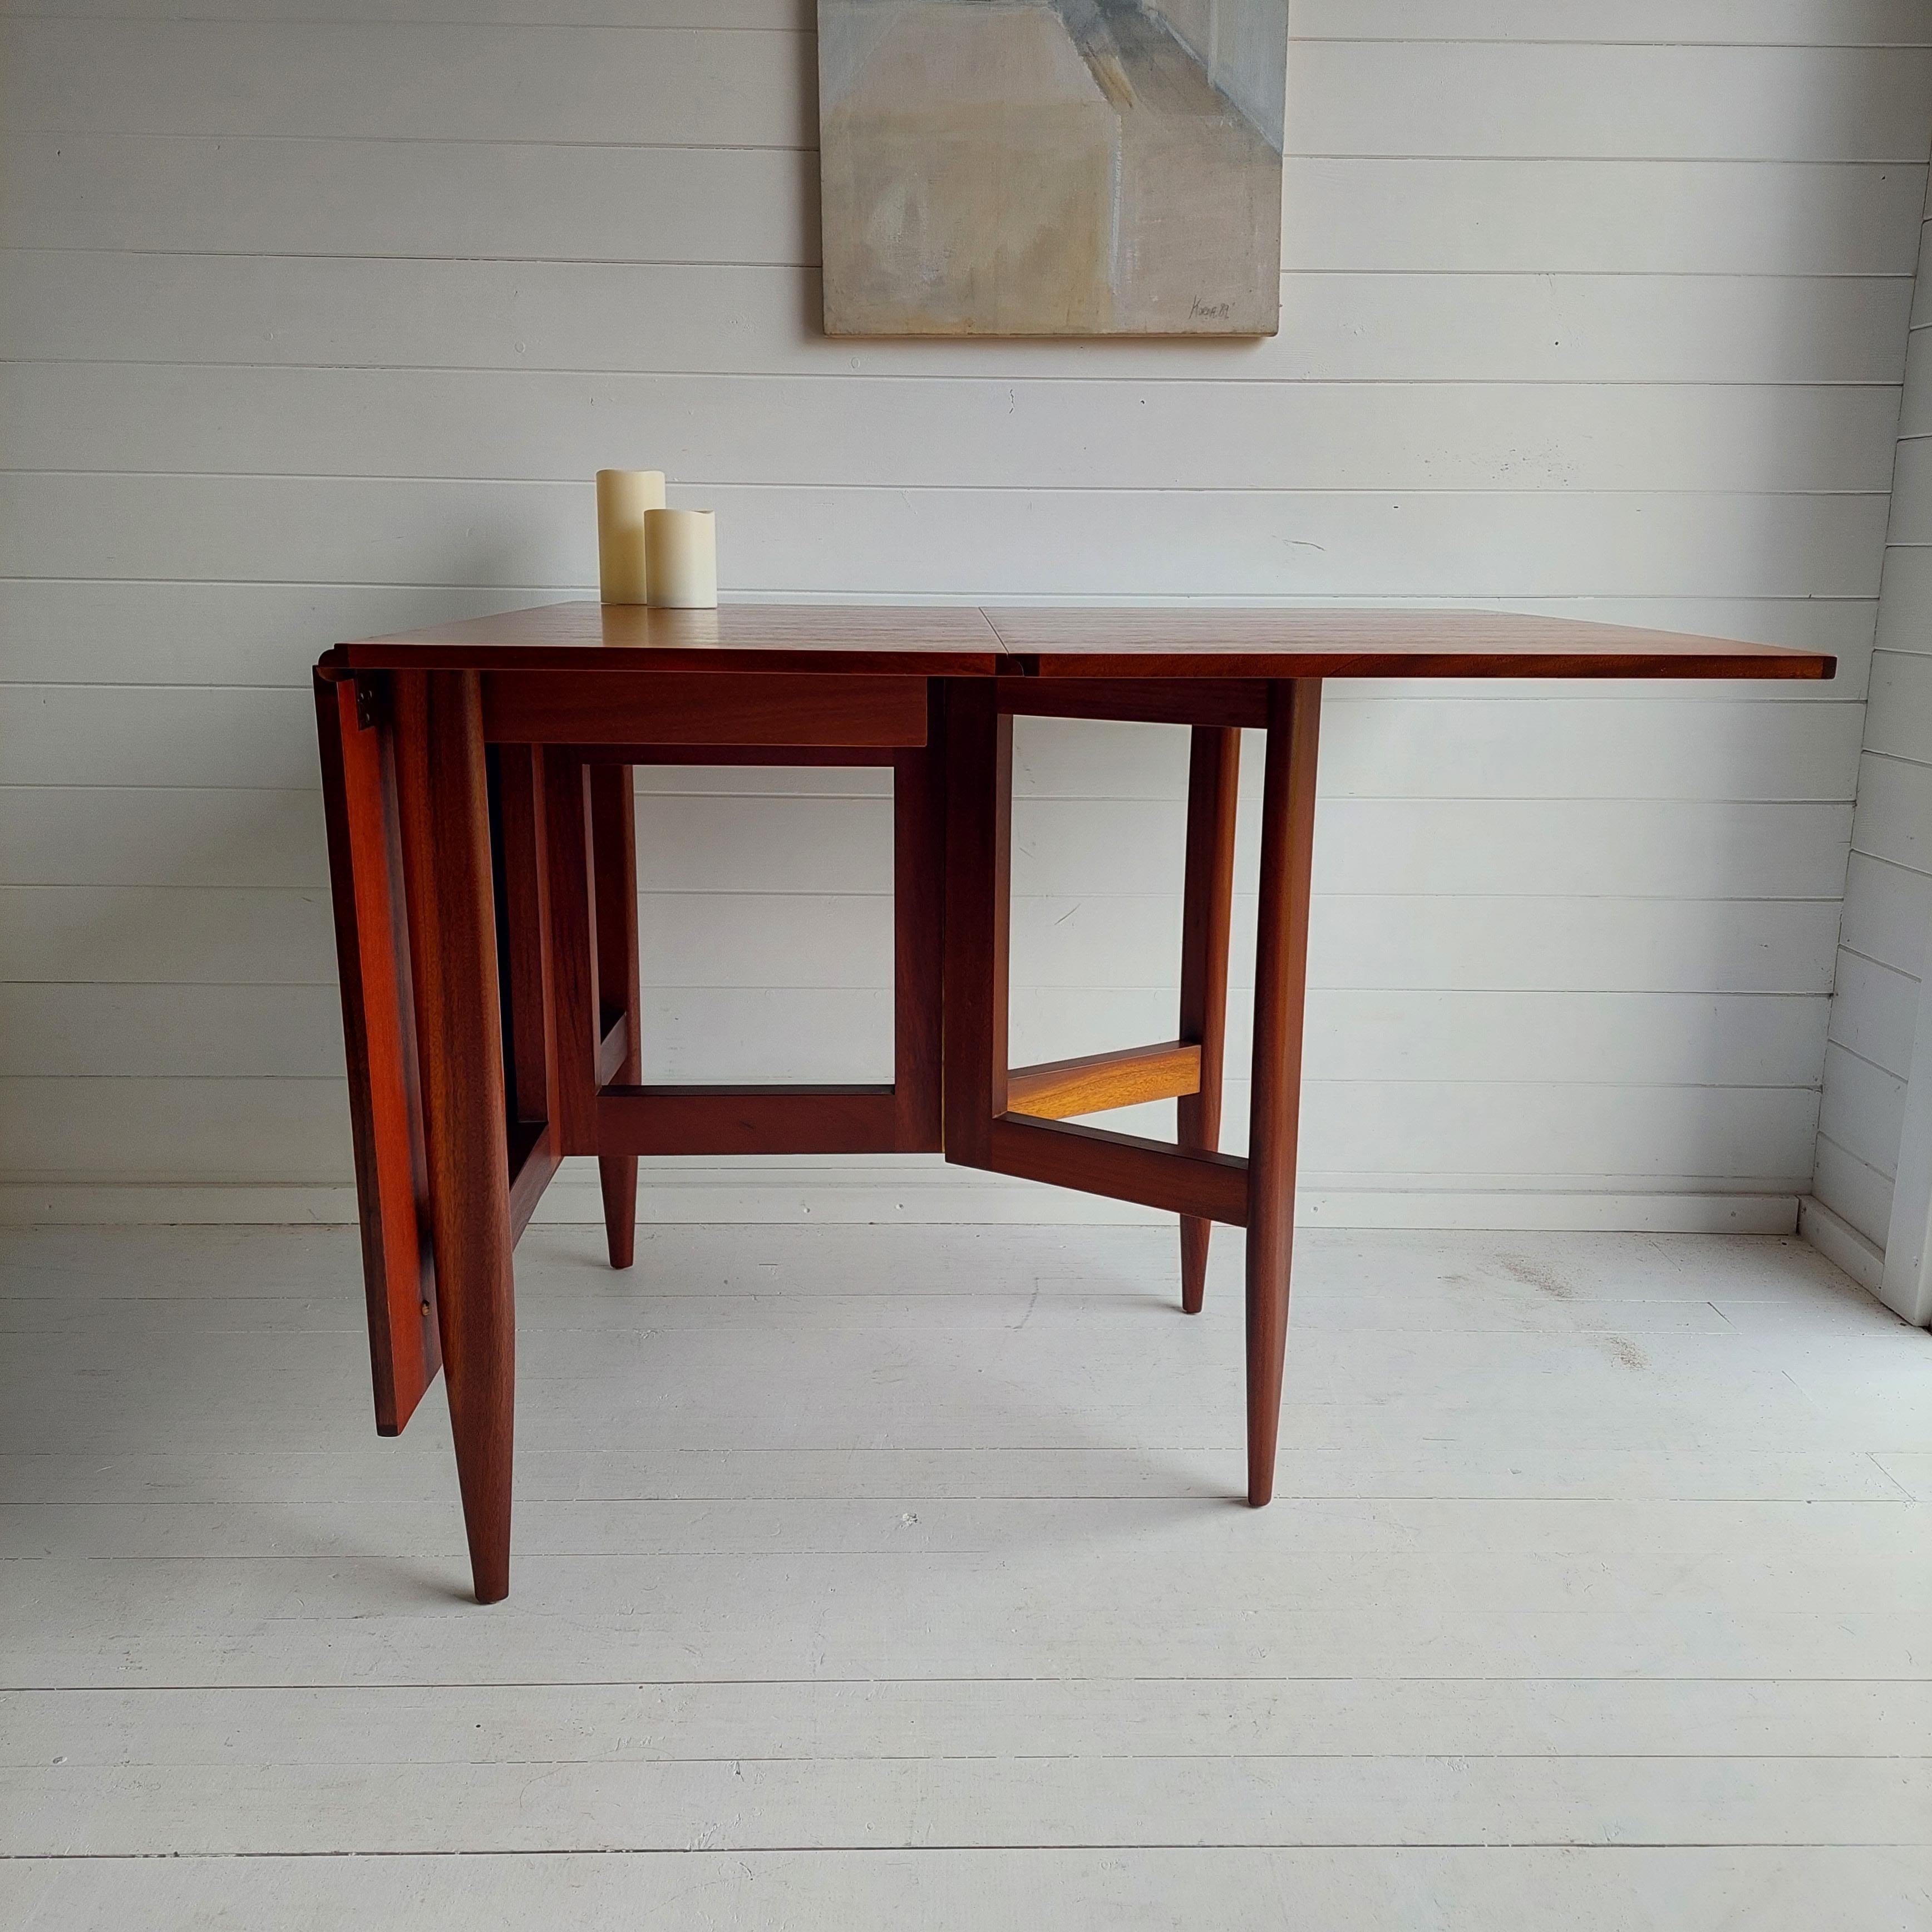 Unique Danish spacesaver gateleg dining table, circa 1960/70s

In the style of George Nelson model 4656, for Herman Miller in 1946, and 1955's design by by Peter Hvidt & Orla Mølgaard for France & Søn.
This example updated a classic form — which